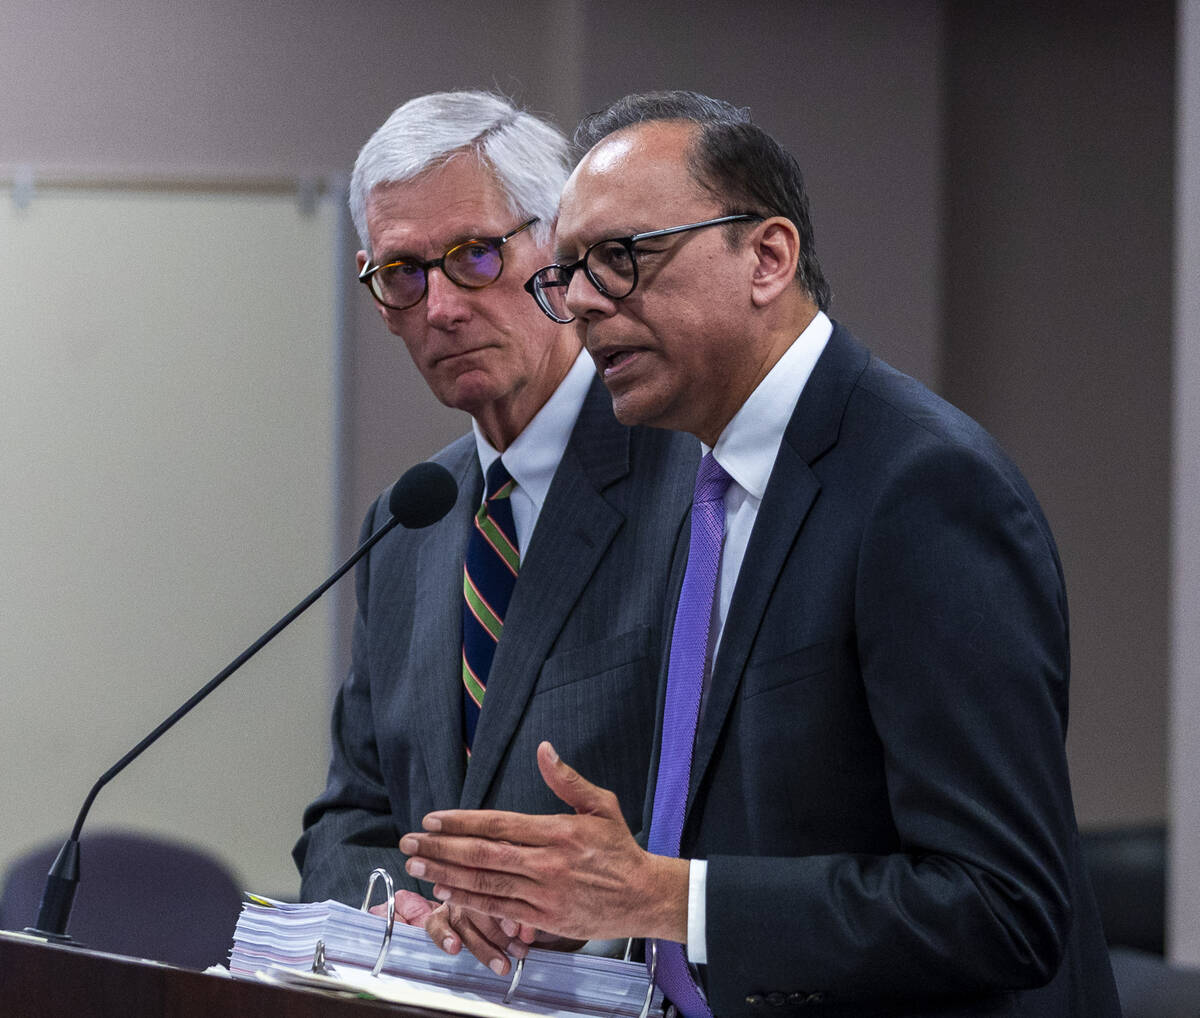 Bally's Corporation Senior VP Ameet Patel, right, with lawyer Dan Reaser speaks at the podium a ...